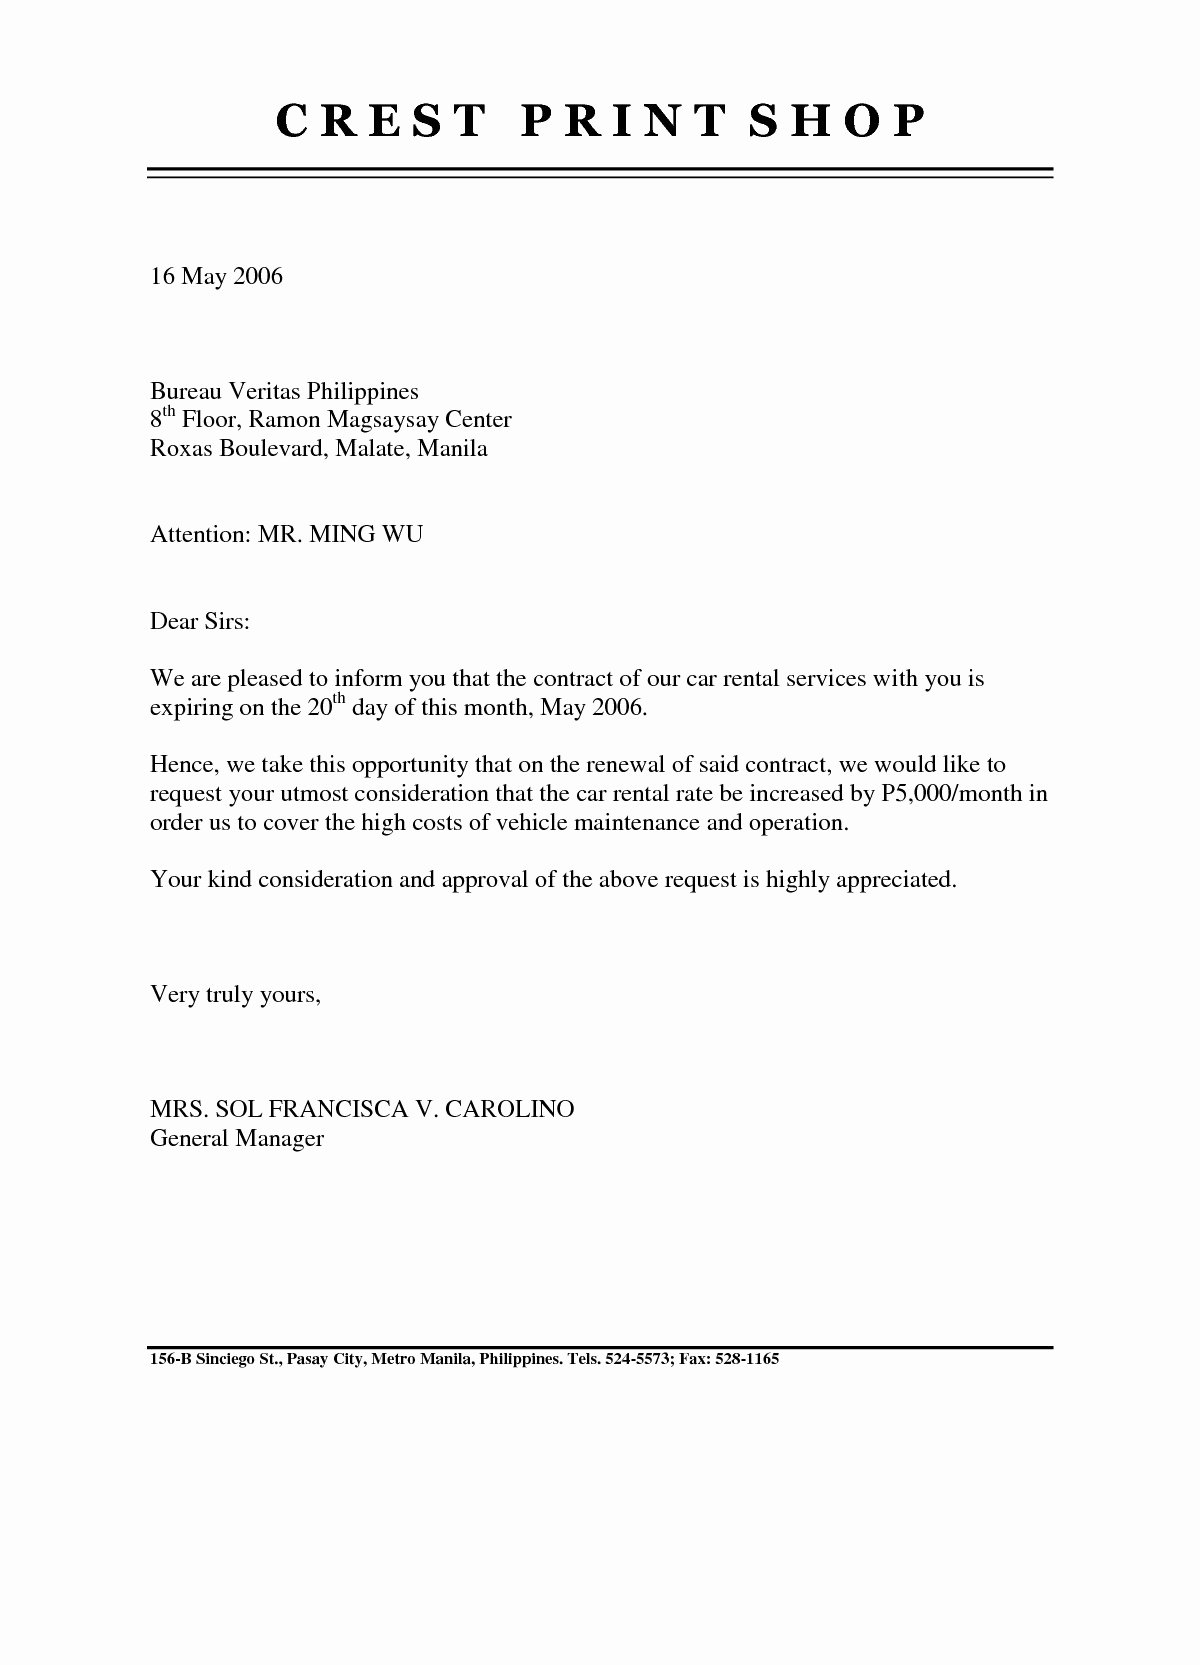 Manufacturers Rep Agreement Sample Awesome Contract Negotiation Letter Template Examples